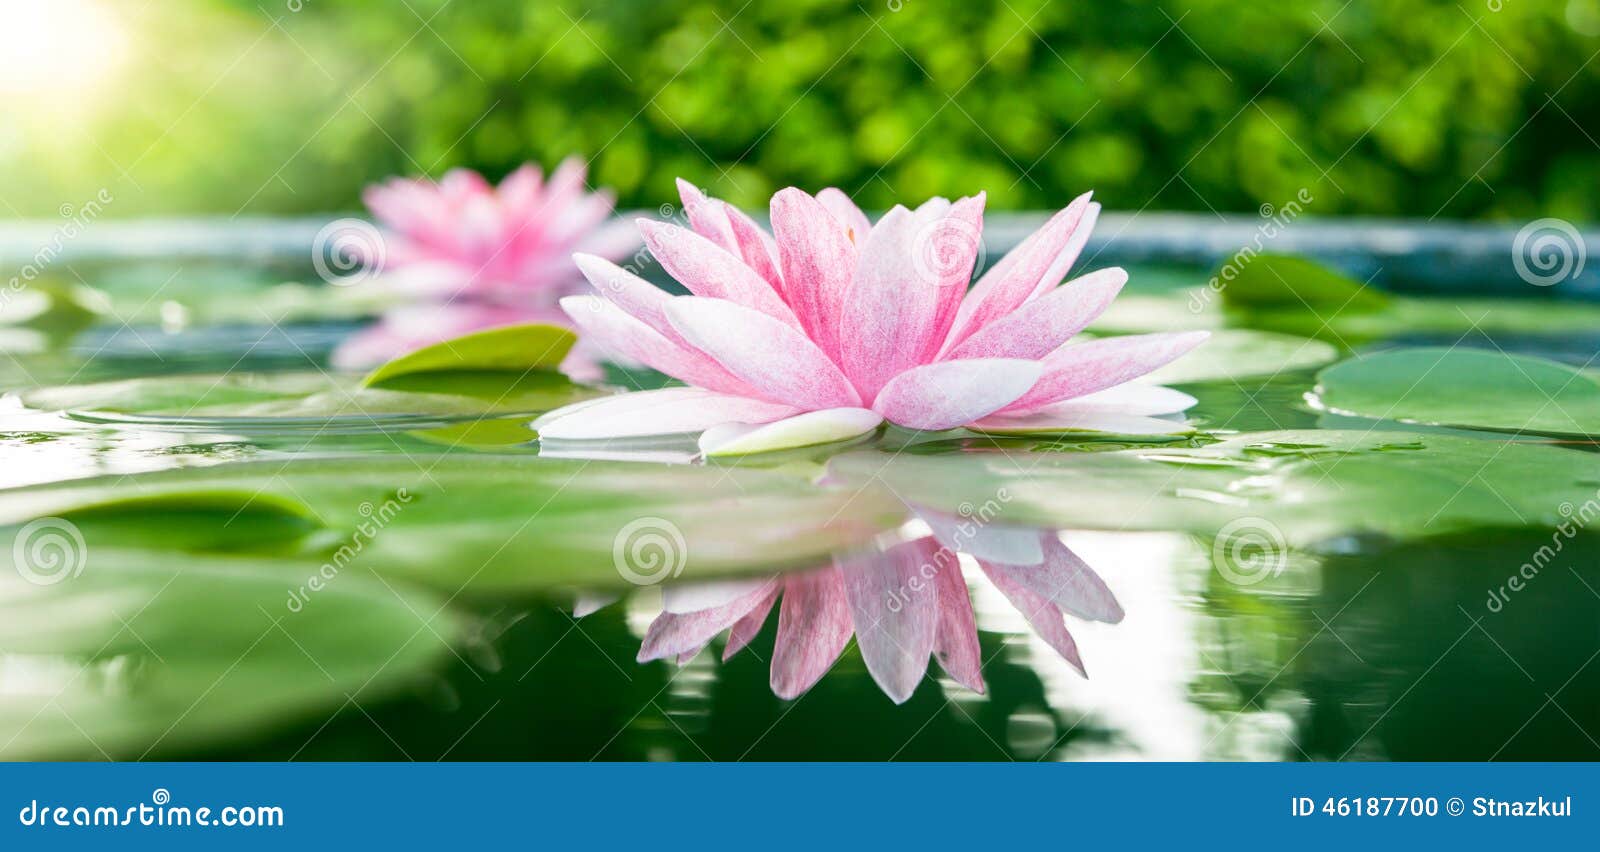 beautiful pink lotus, water plant with reflection in a pond